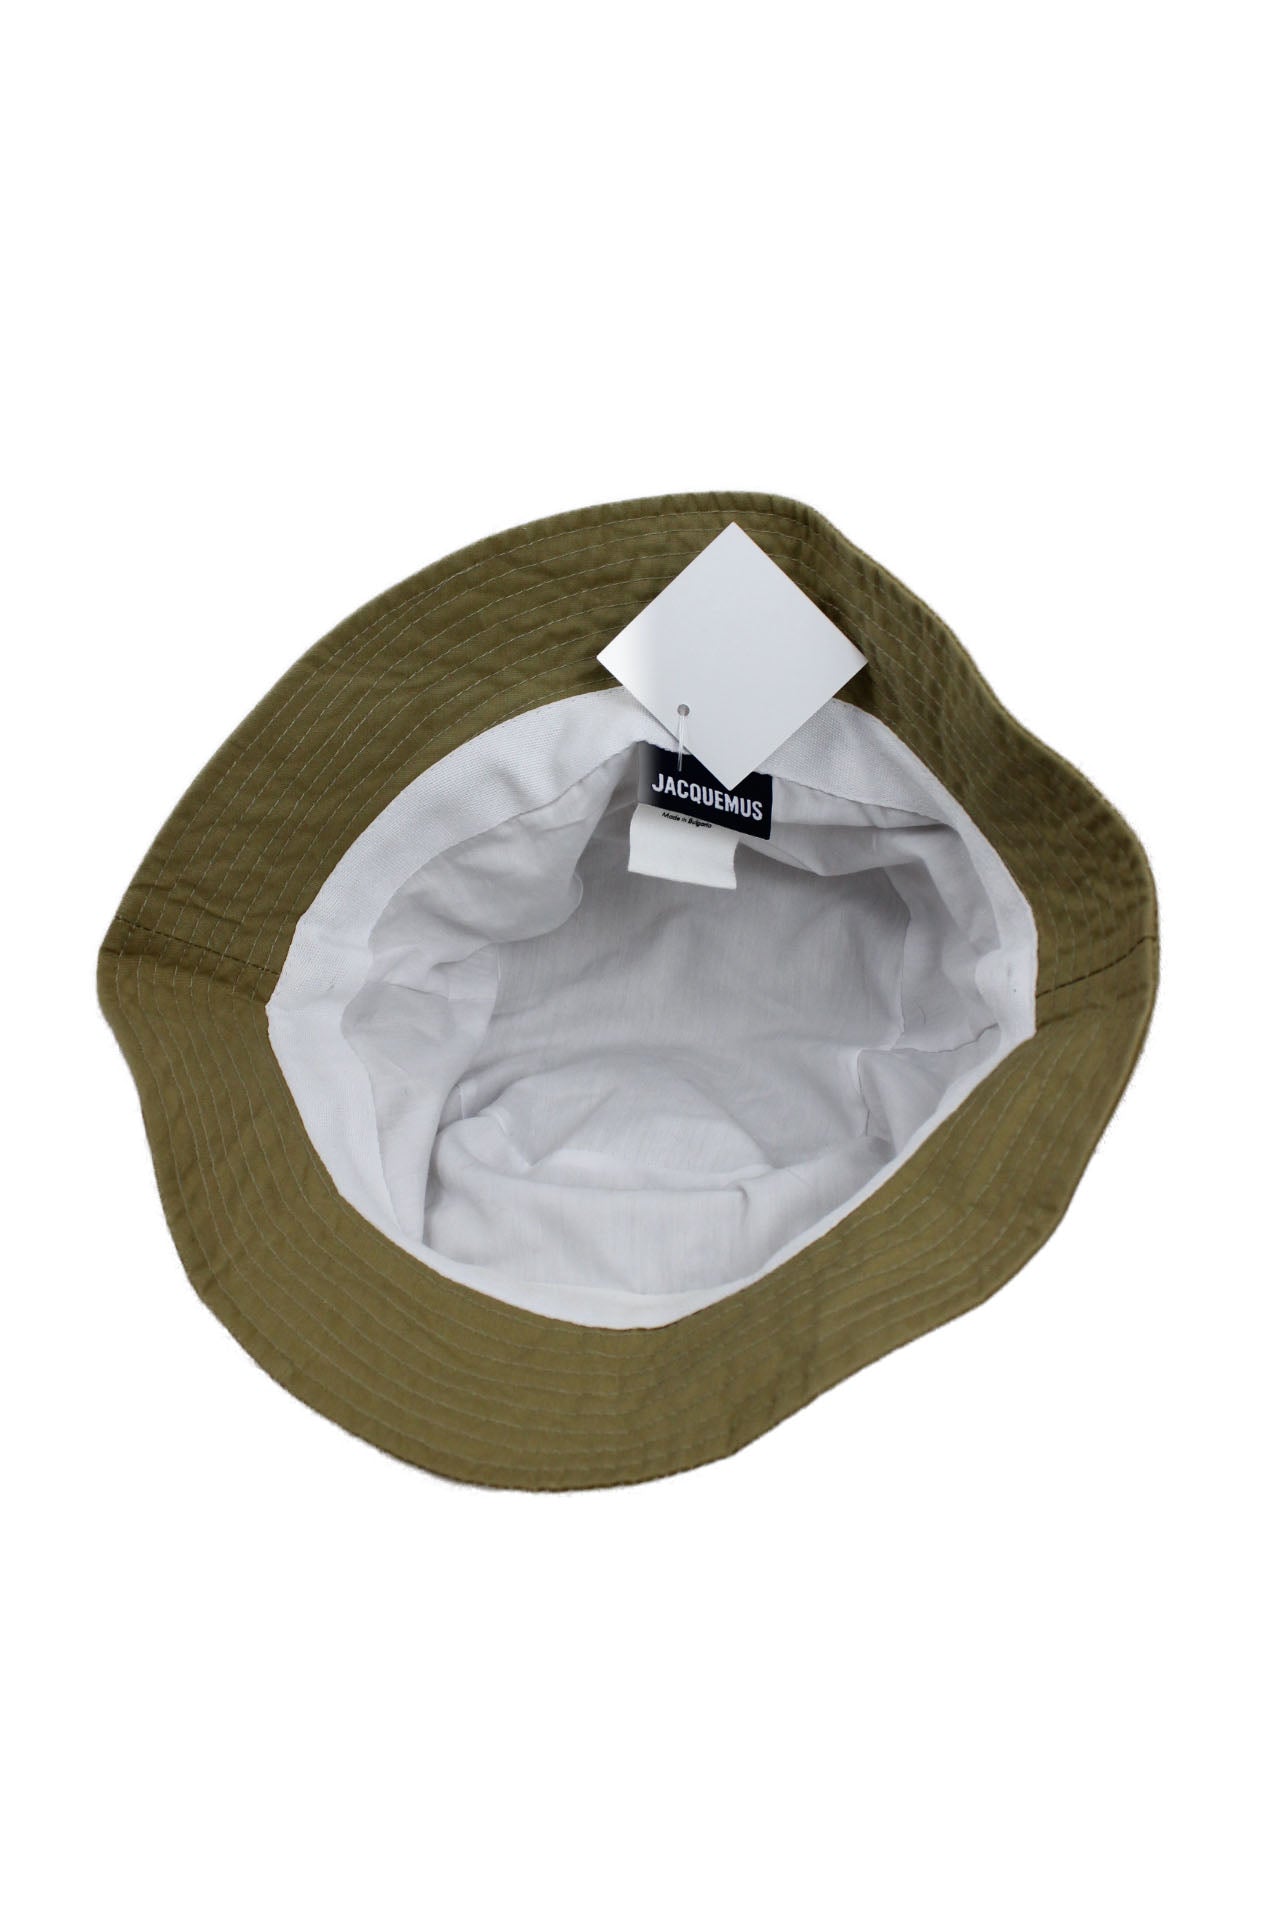 underside view with full lining and 'jacquemus' logo tag of hat.